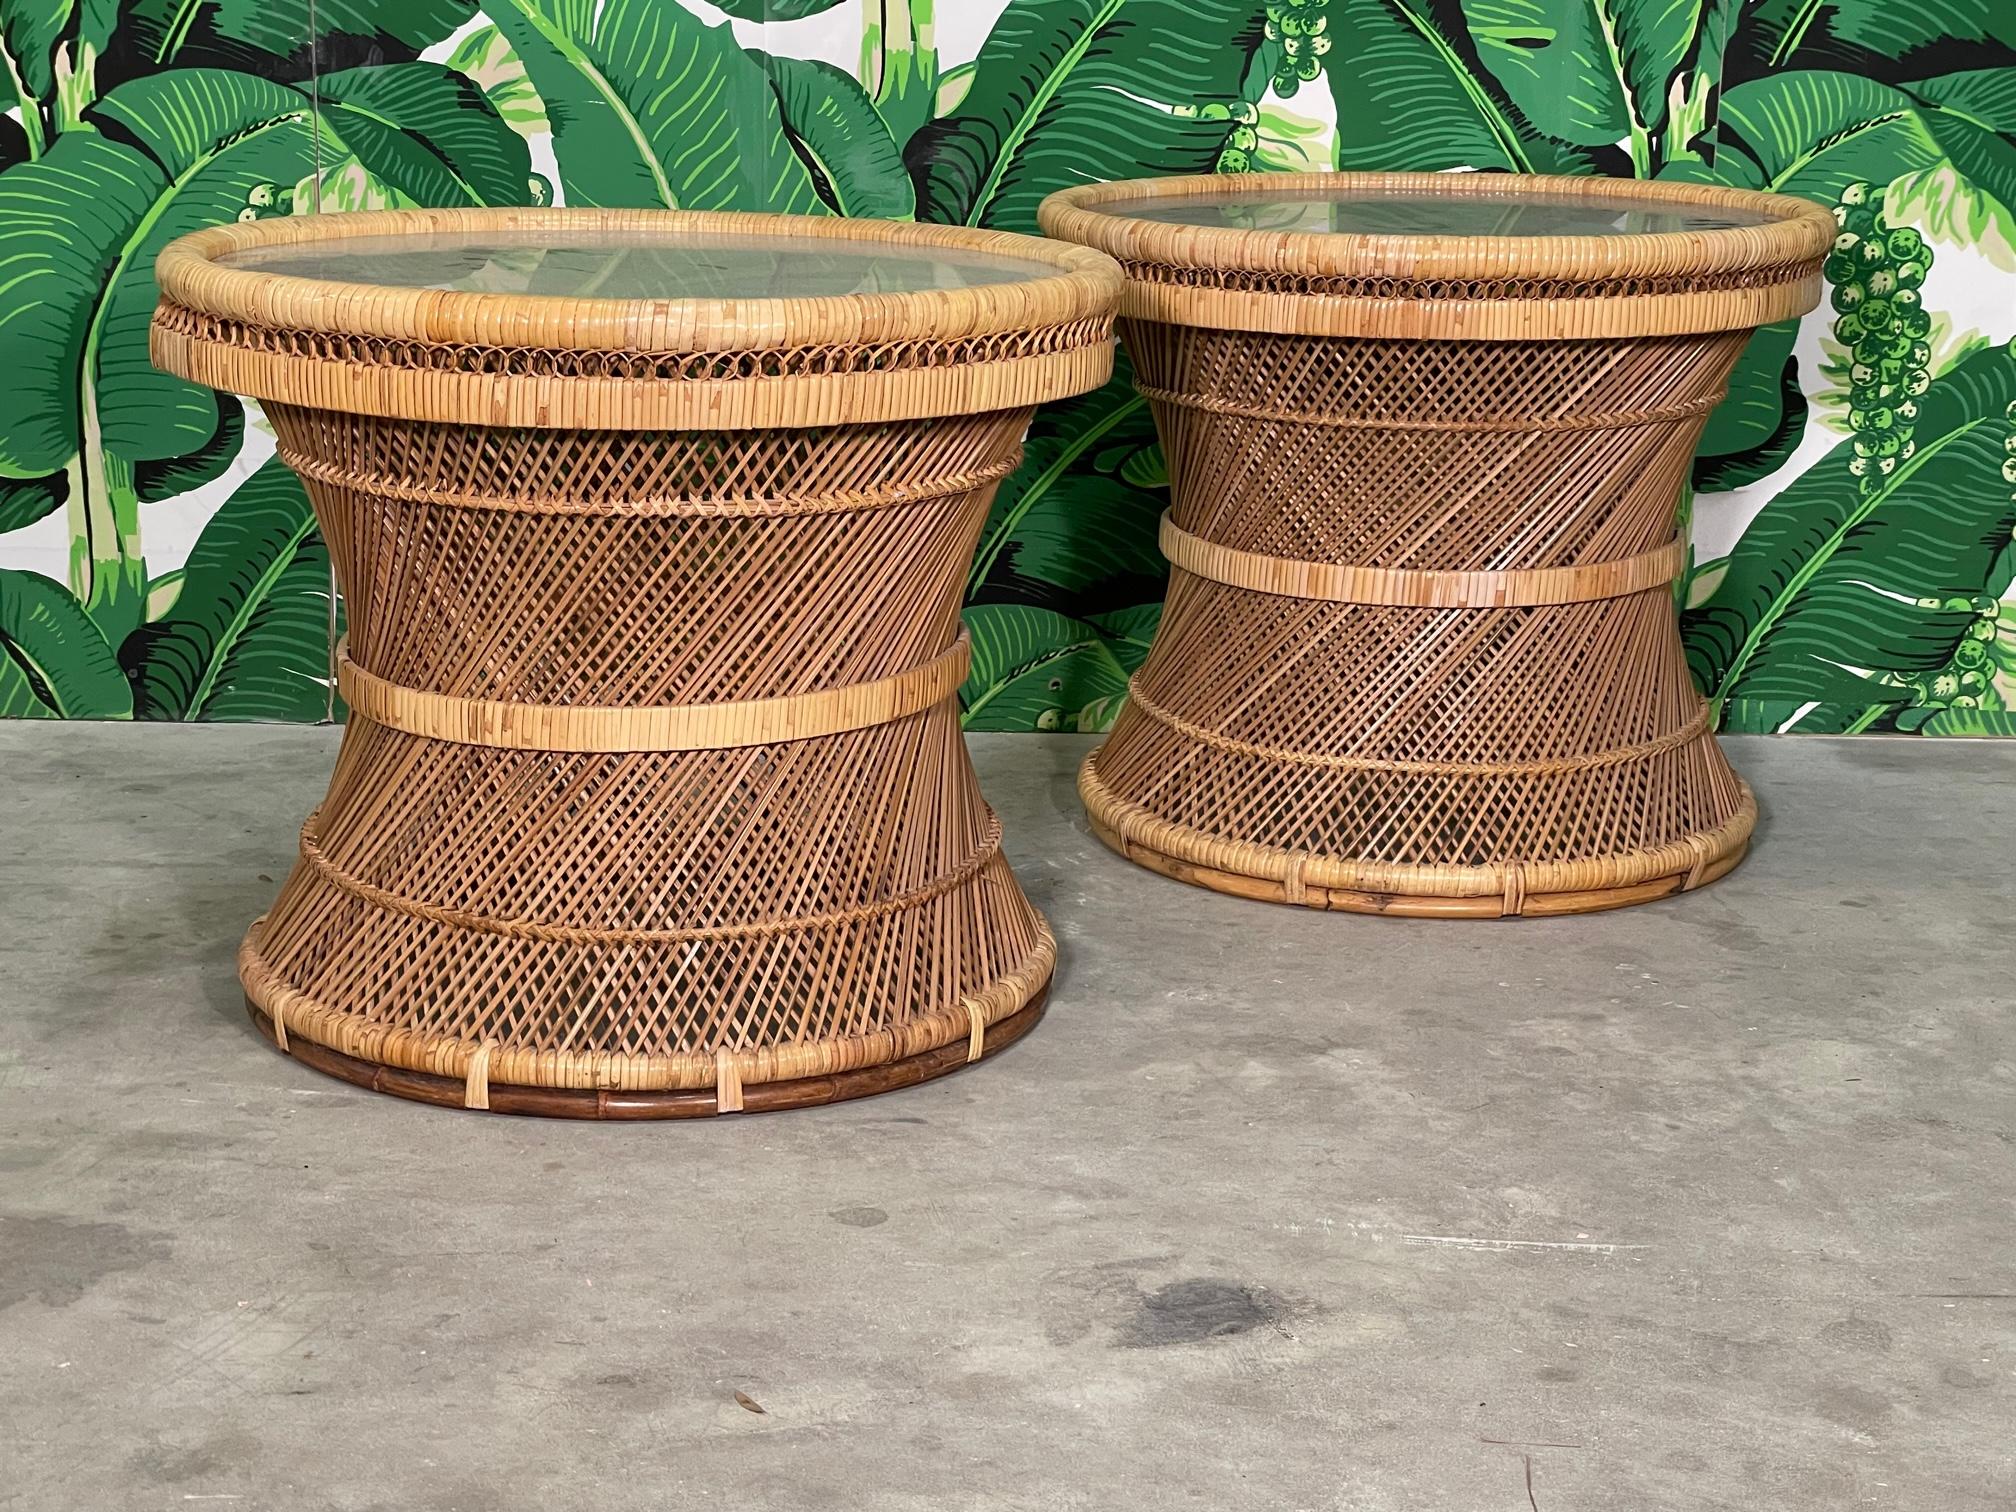 Pair of vintage wicker side tables feature an hourglass shape and glass tops. Design resembles that of the iconic Peacock, or 